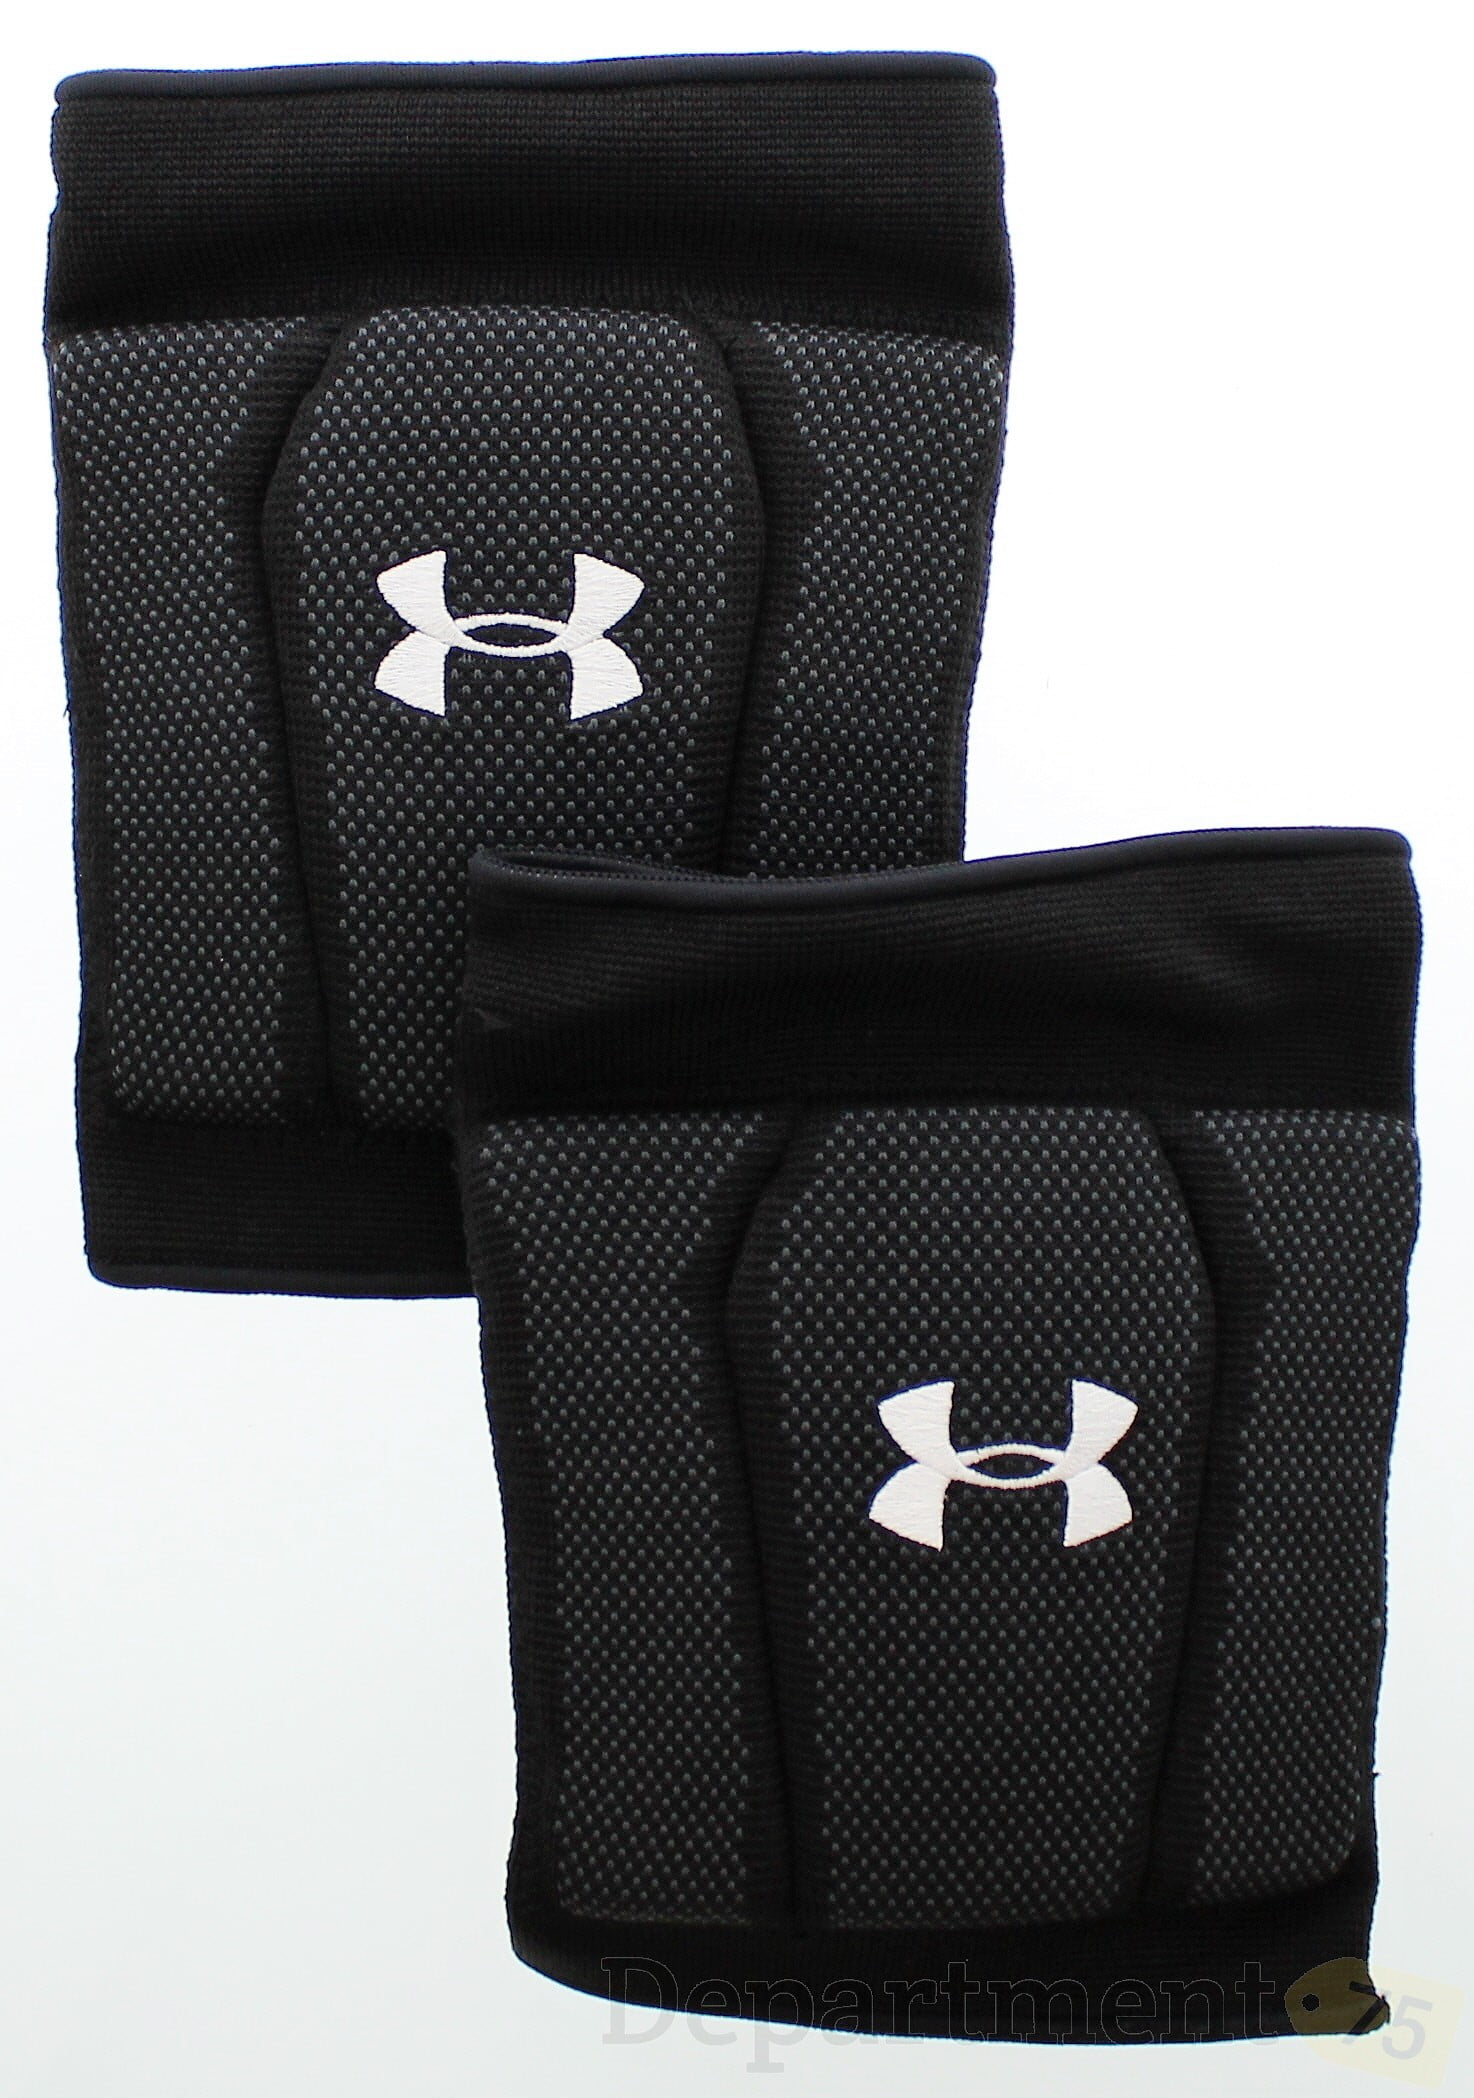 New Under Armour White Volleyball Knee Pads L/XL Unisex 